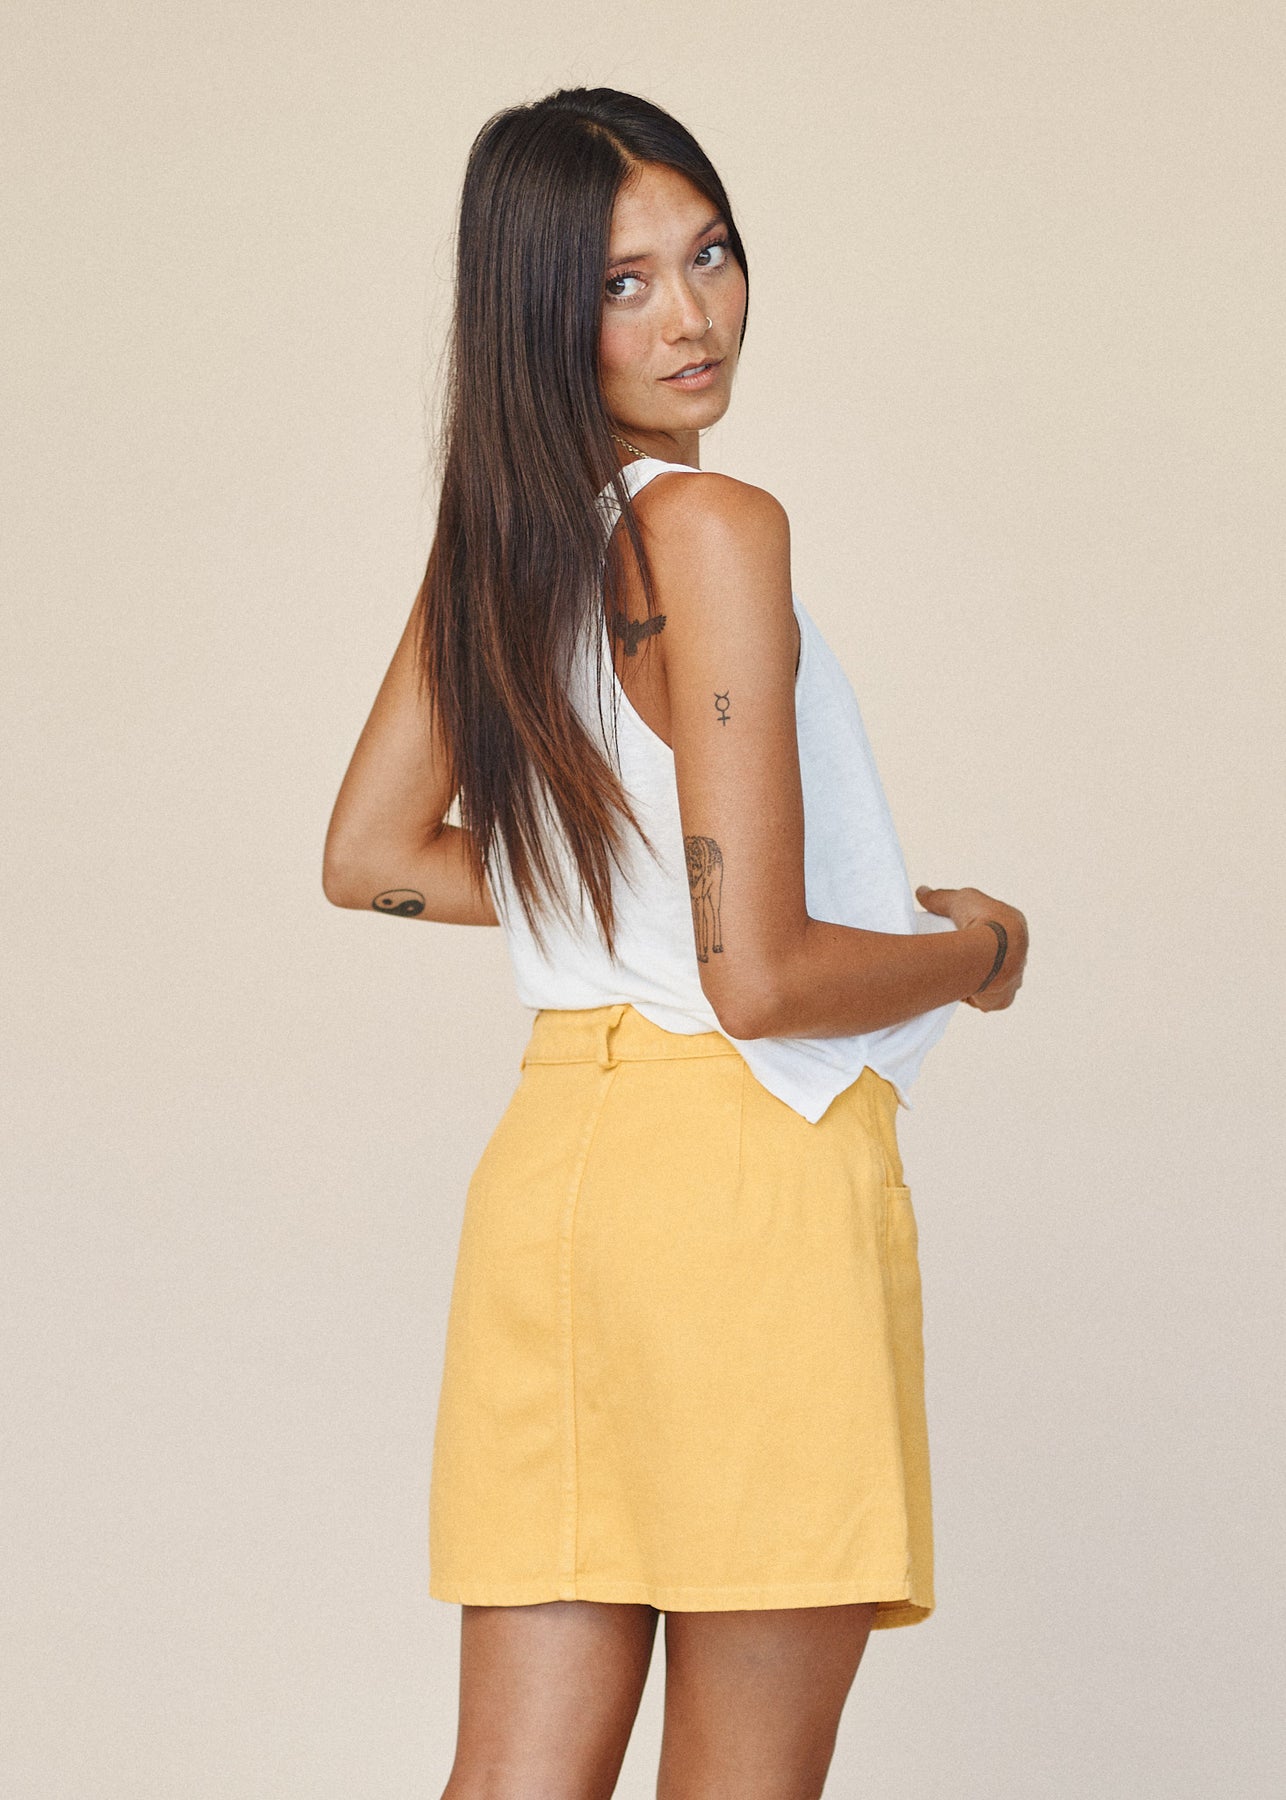 Classic button-down skirt. Fitted cut can be perfectly paired with a tucked, oversized top for effortless chic. 55% hemp, 45% organic cotton twill. Made with love in California.